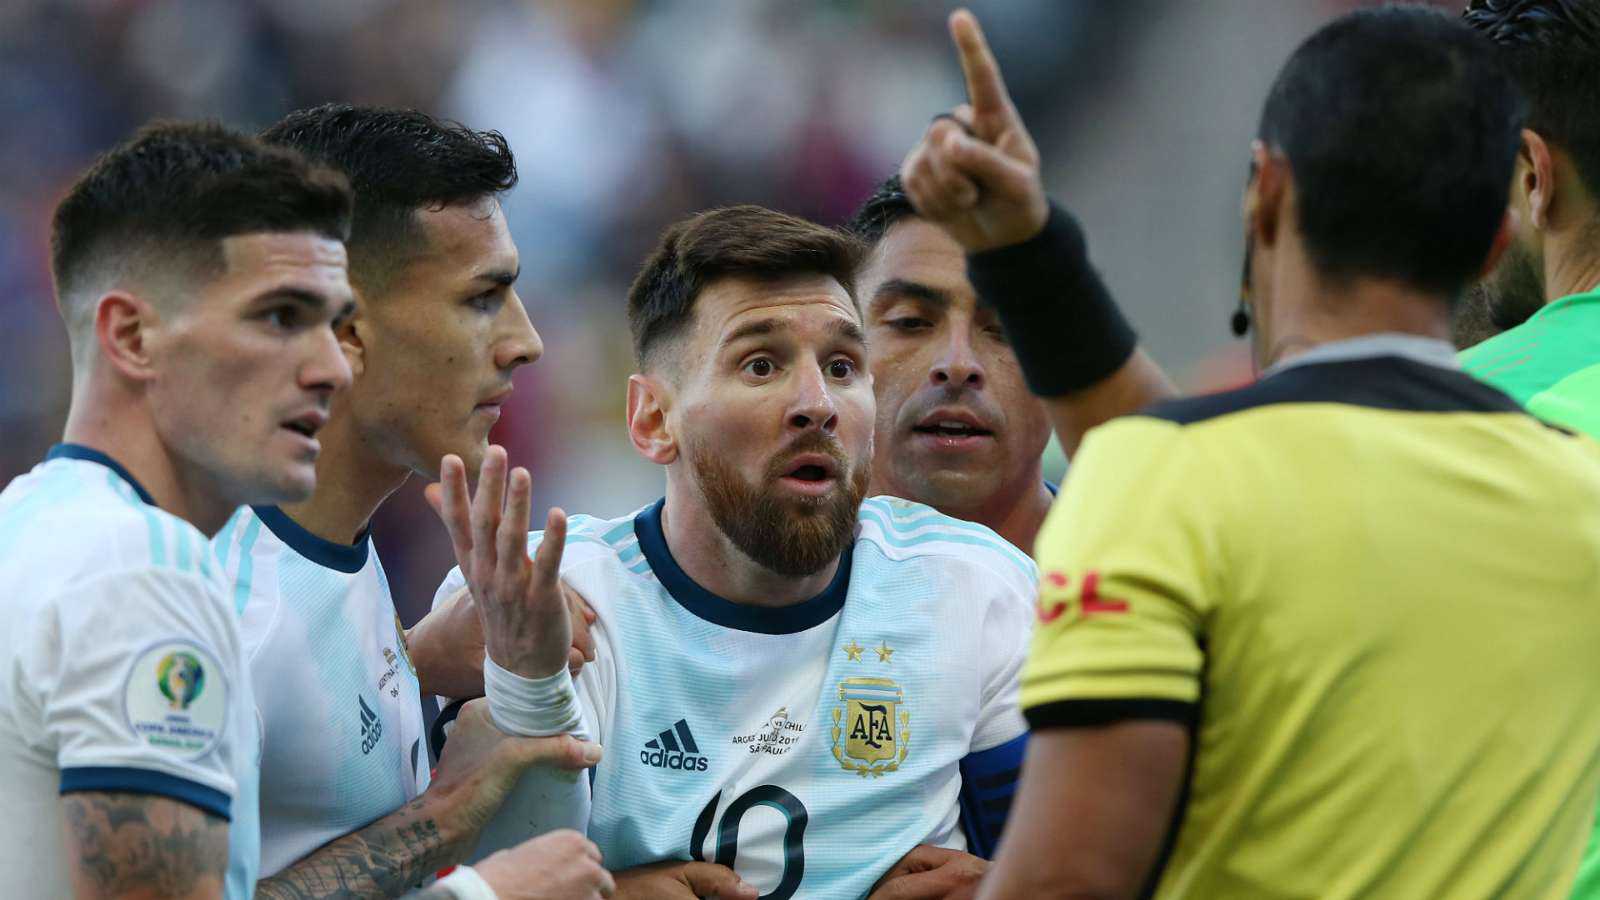 'The Copa is set up for Brazil' - Messi slams CONMEBOL 'corruption' and snubs medal ceremony after Chile red